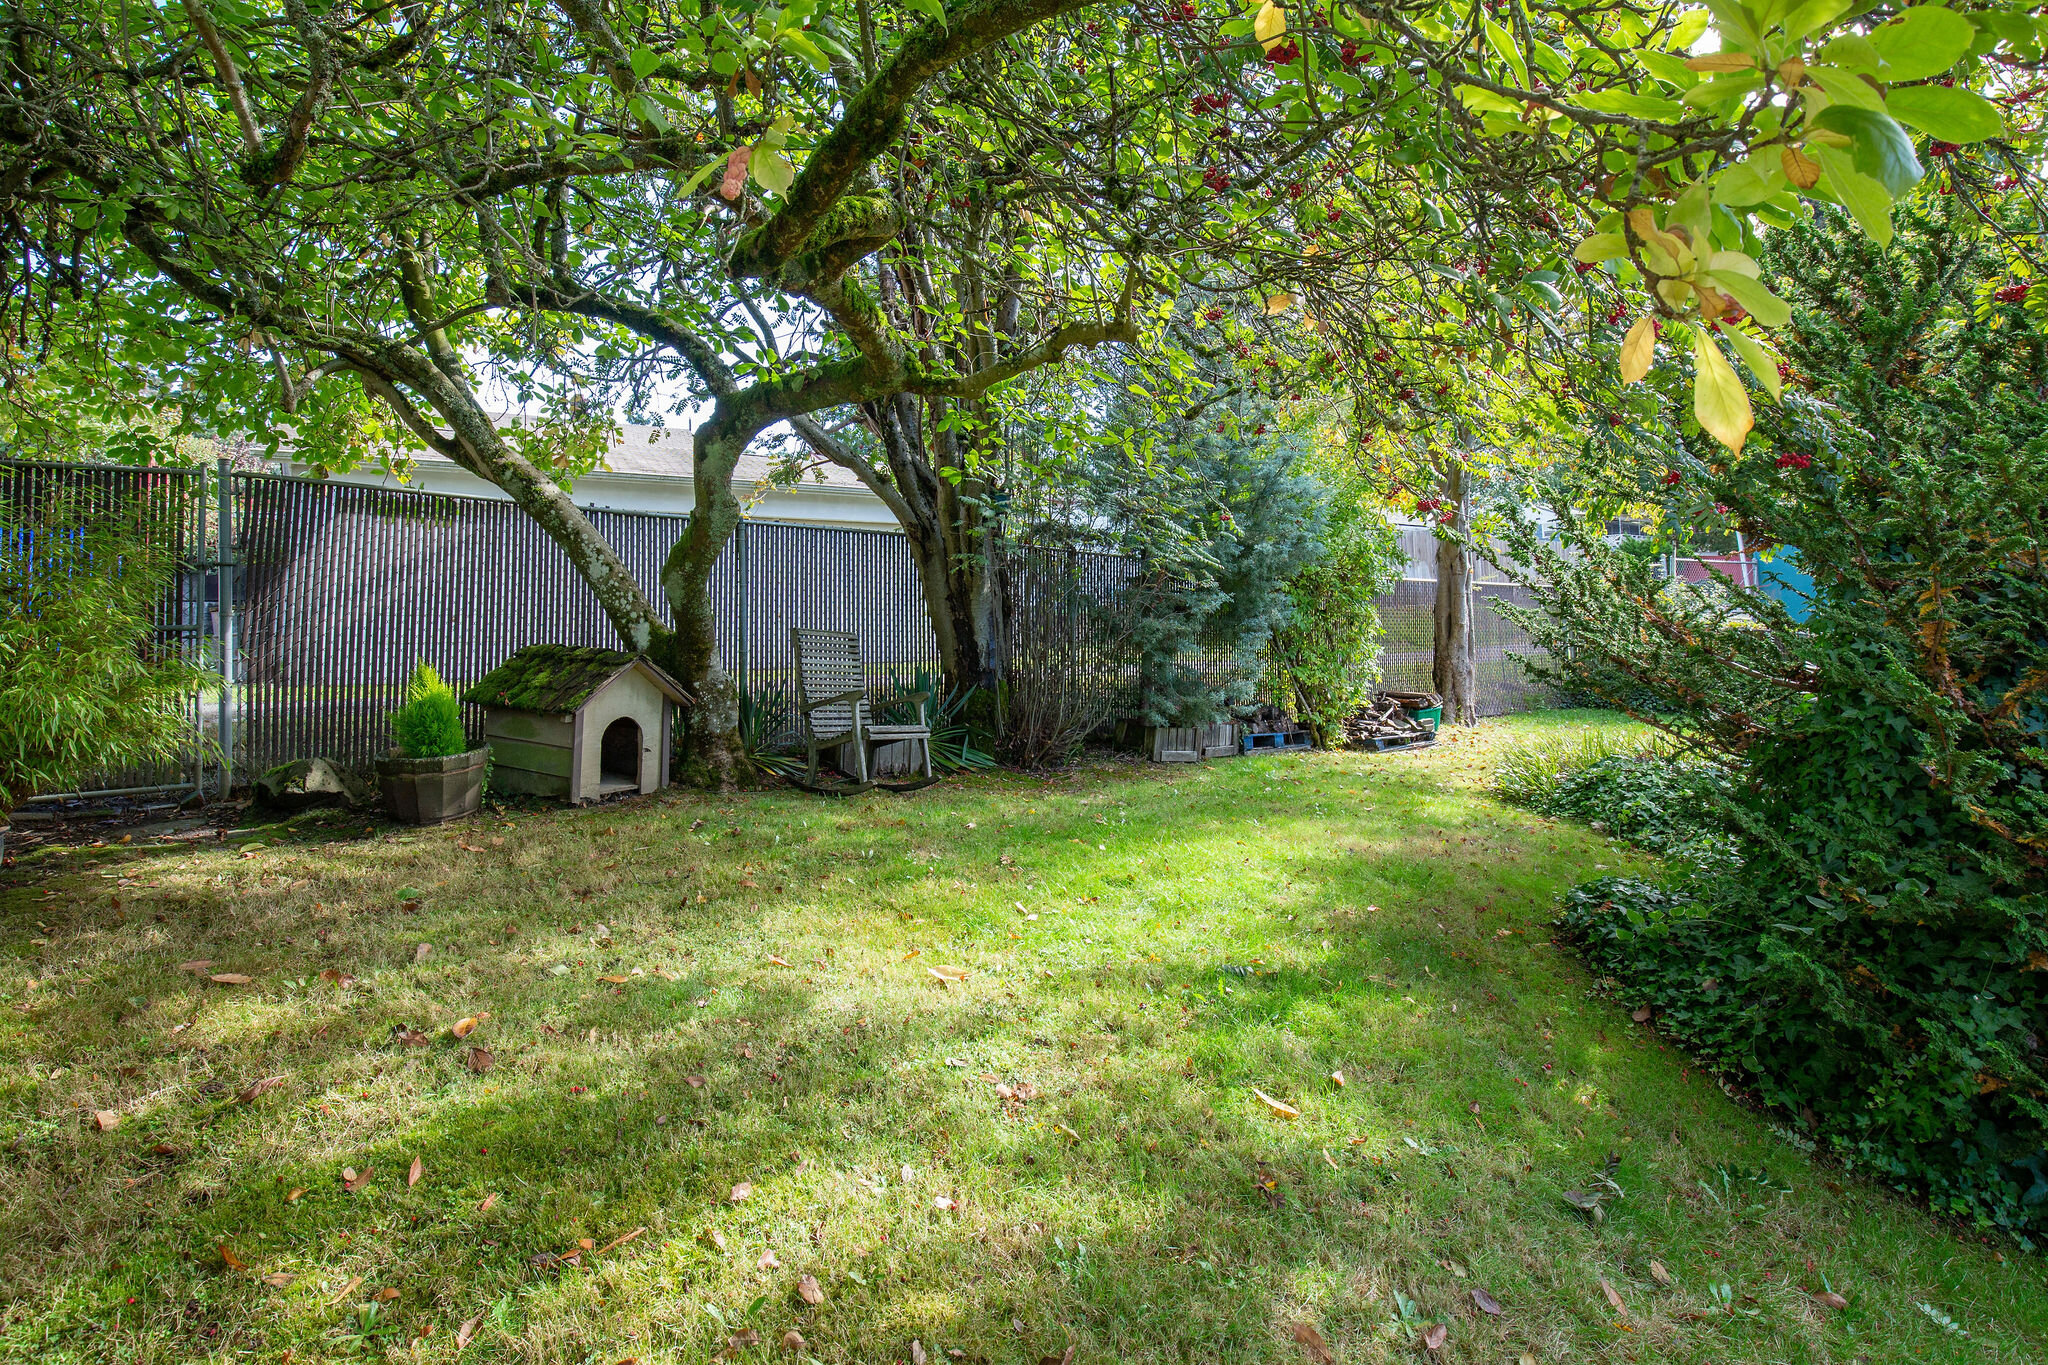  The back of the yard has a wonderful flat area that you could garden, have a chicken coop or just sit in the shade on a sunny day. There is also gate access to the alley and some neighbors have made more pull off-parking and garages coming off the a